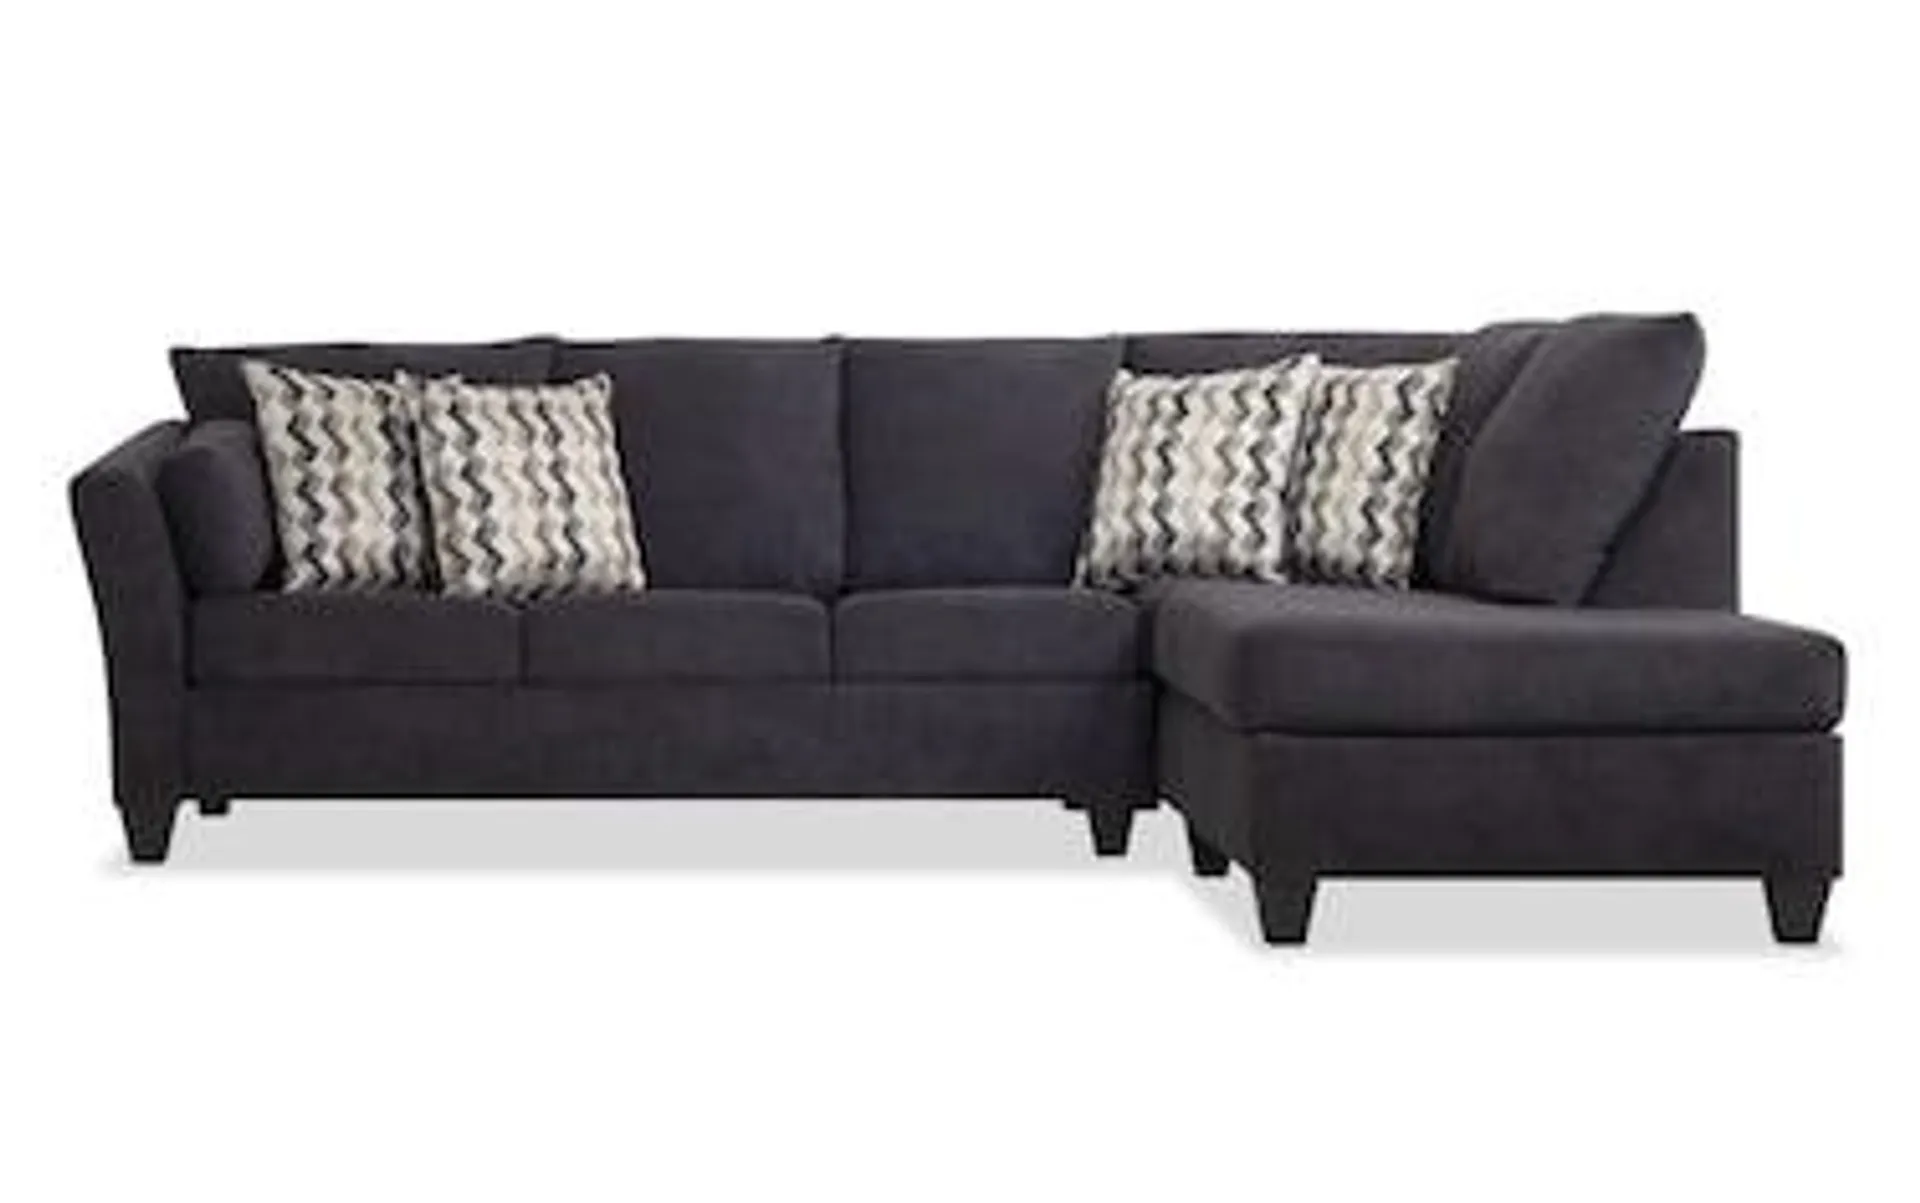 Virgo Charcoal 2 Piece Right Arm Facing Sectional